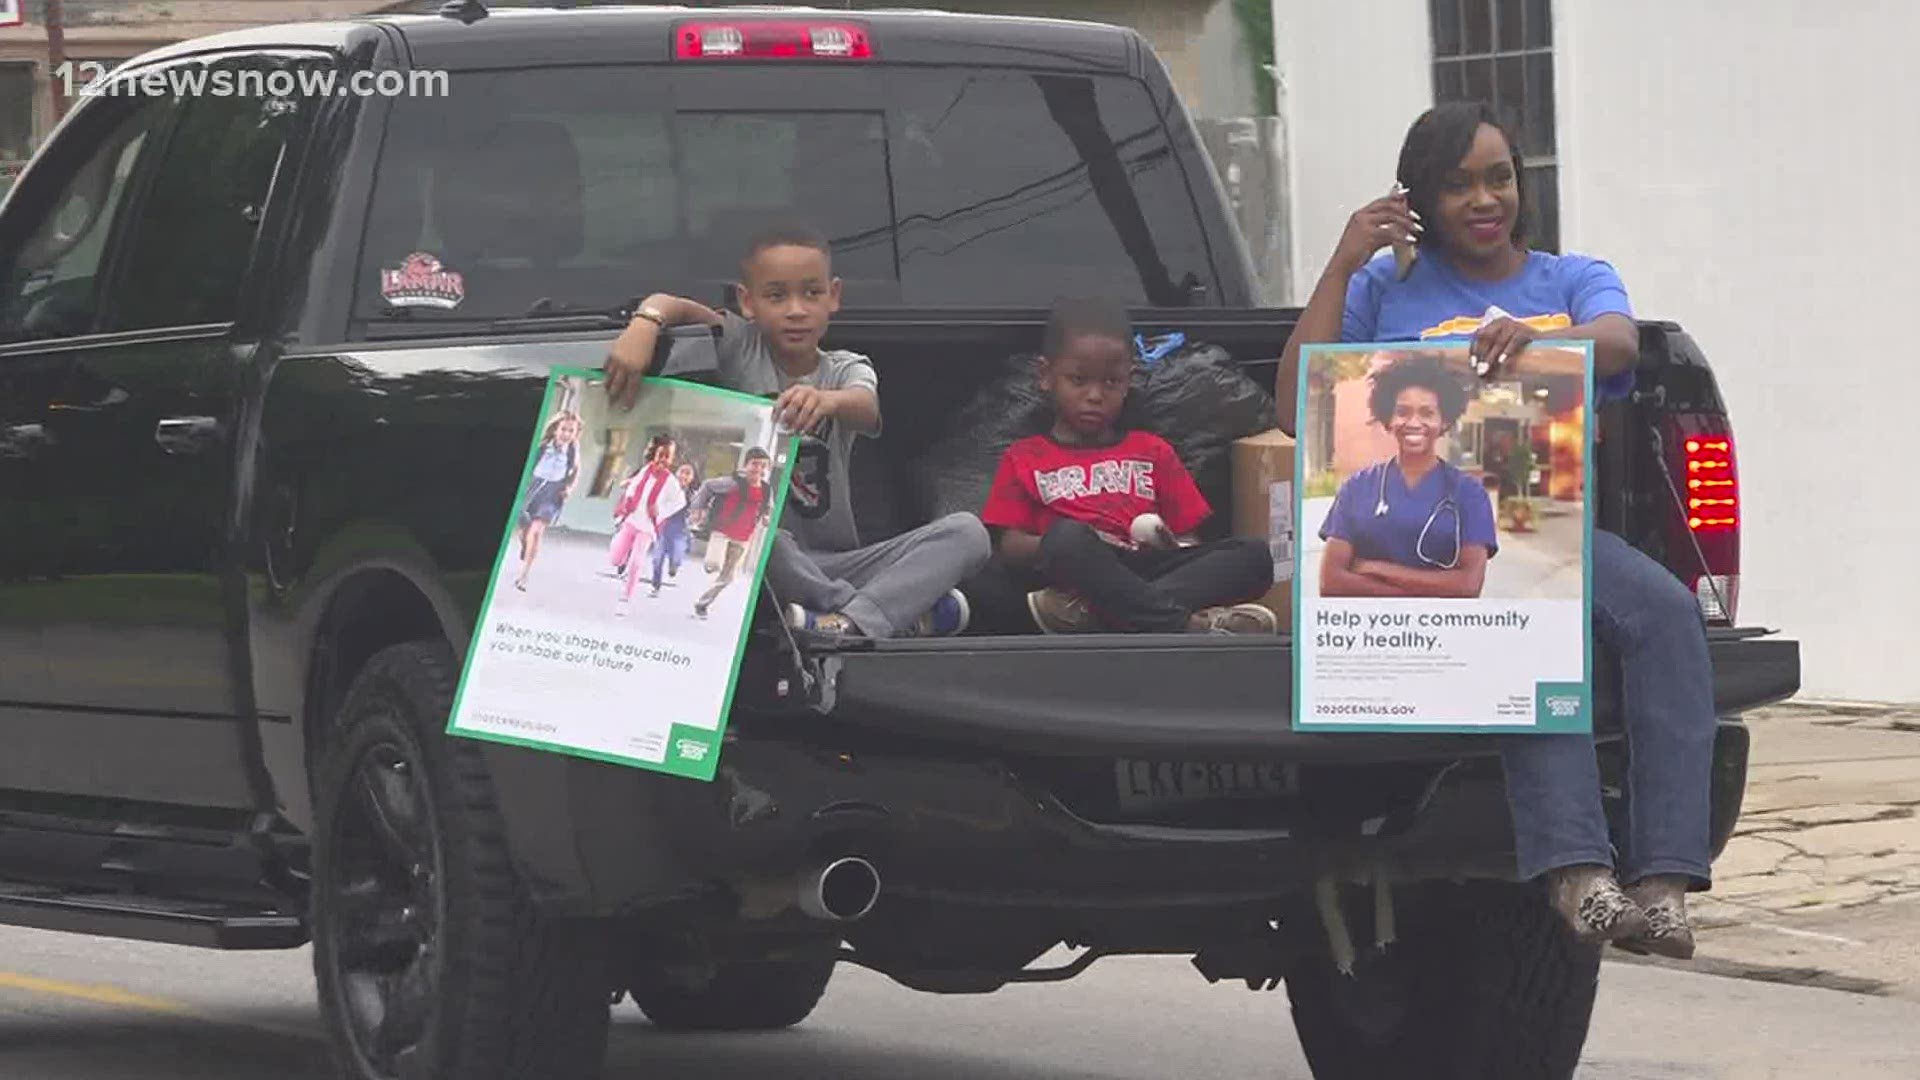 Beaumont NAACP chapter says plans are in the works for future census car parades leading up to the deadline